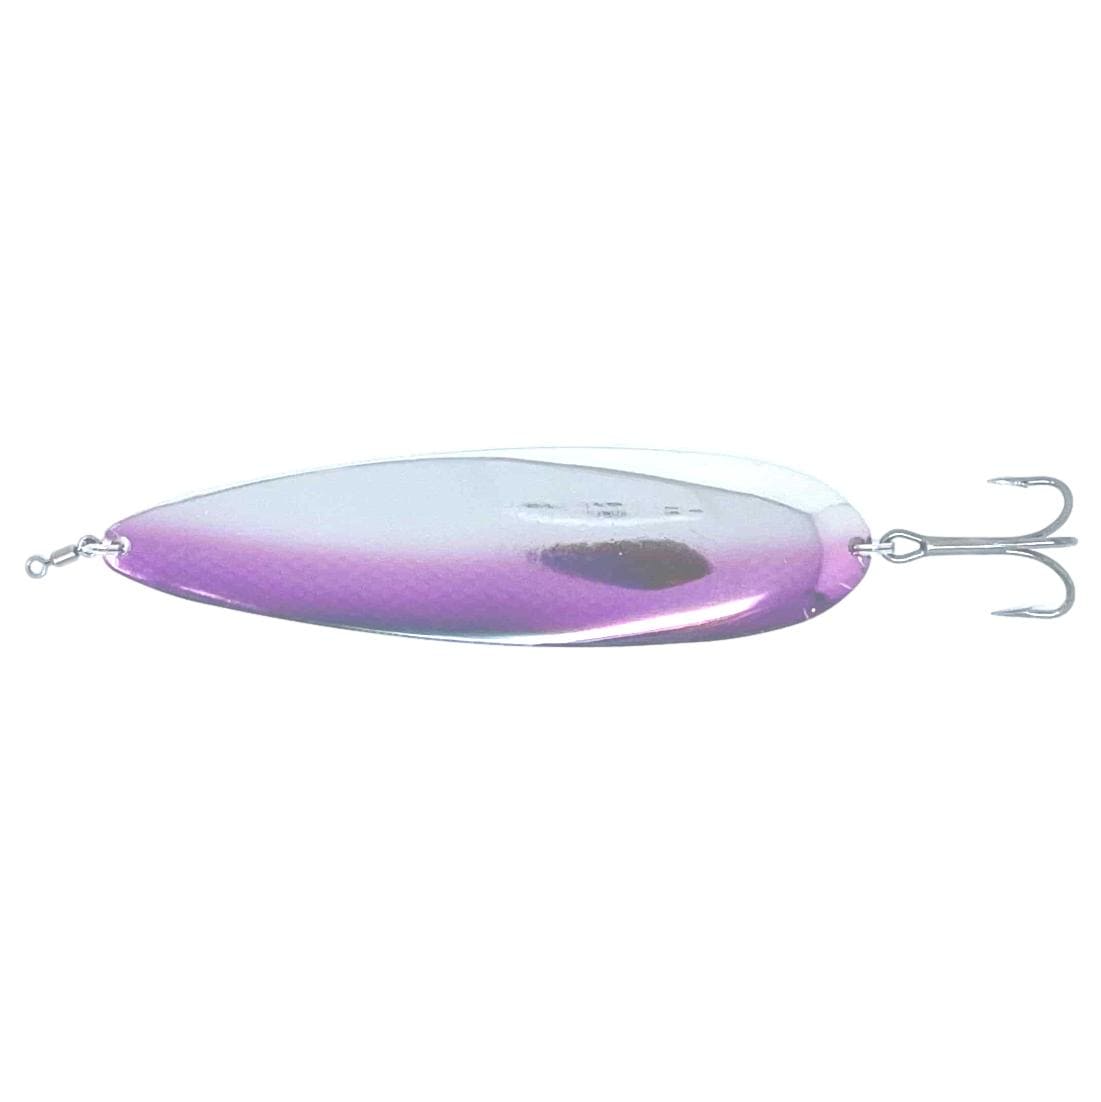 Fishing Lures Tagged Brand_Backwater Custom Baits - The Saltwater Edge